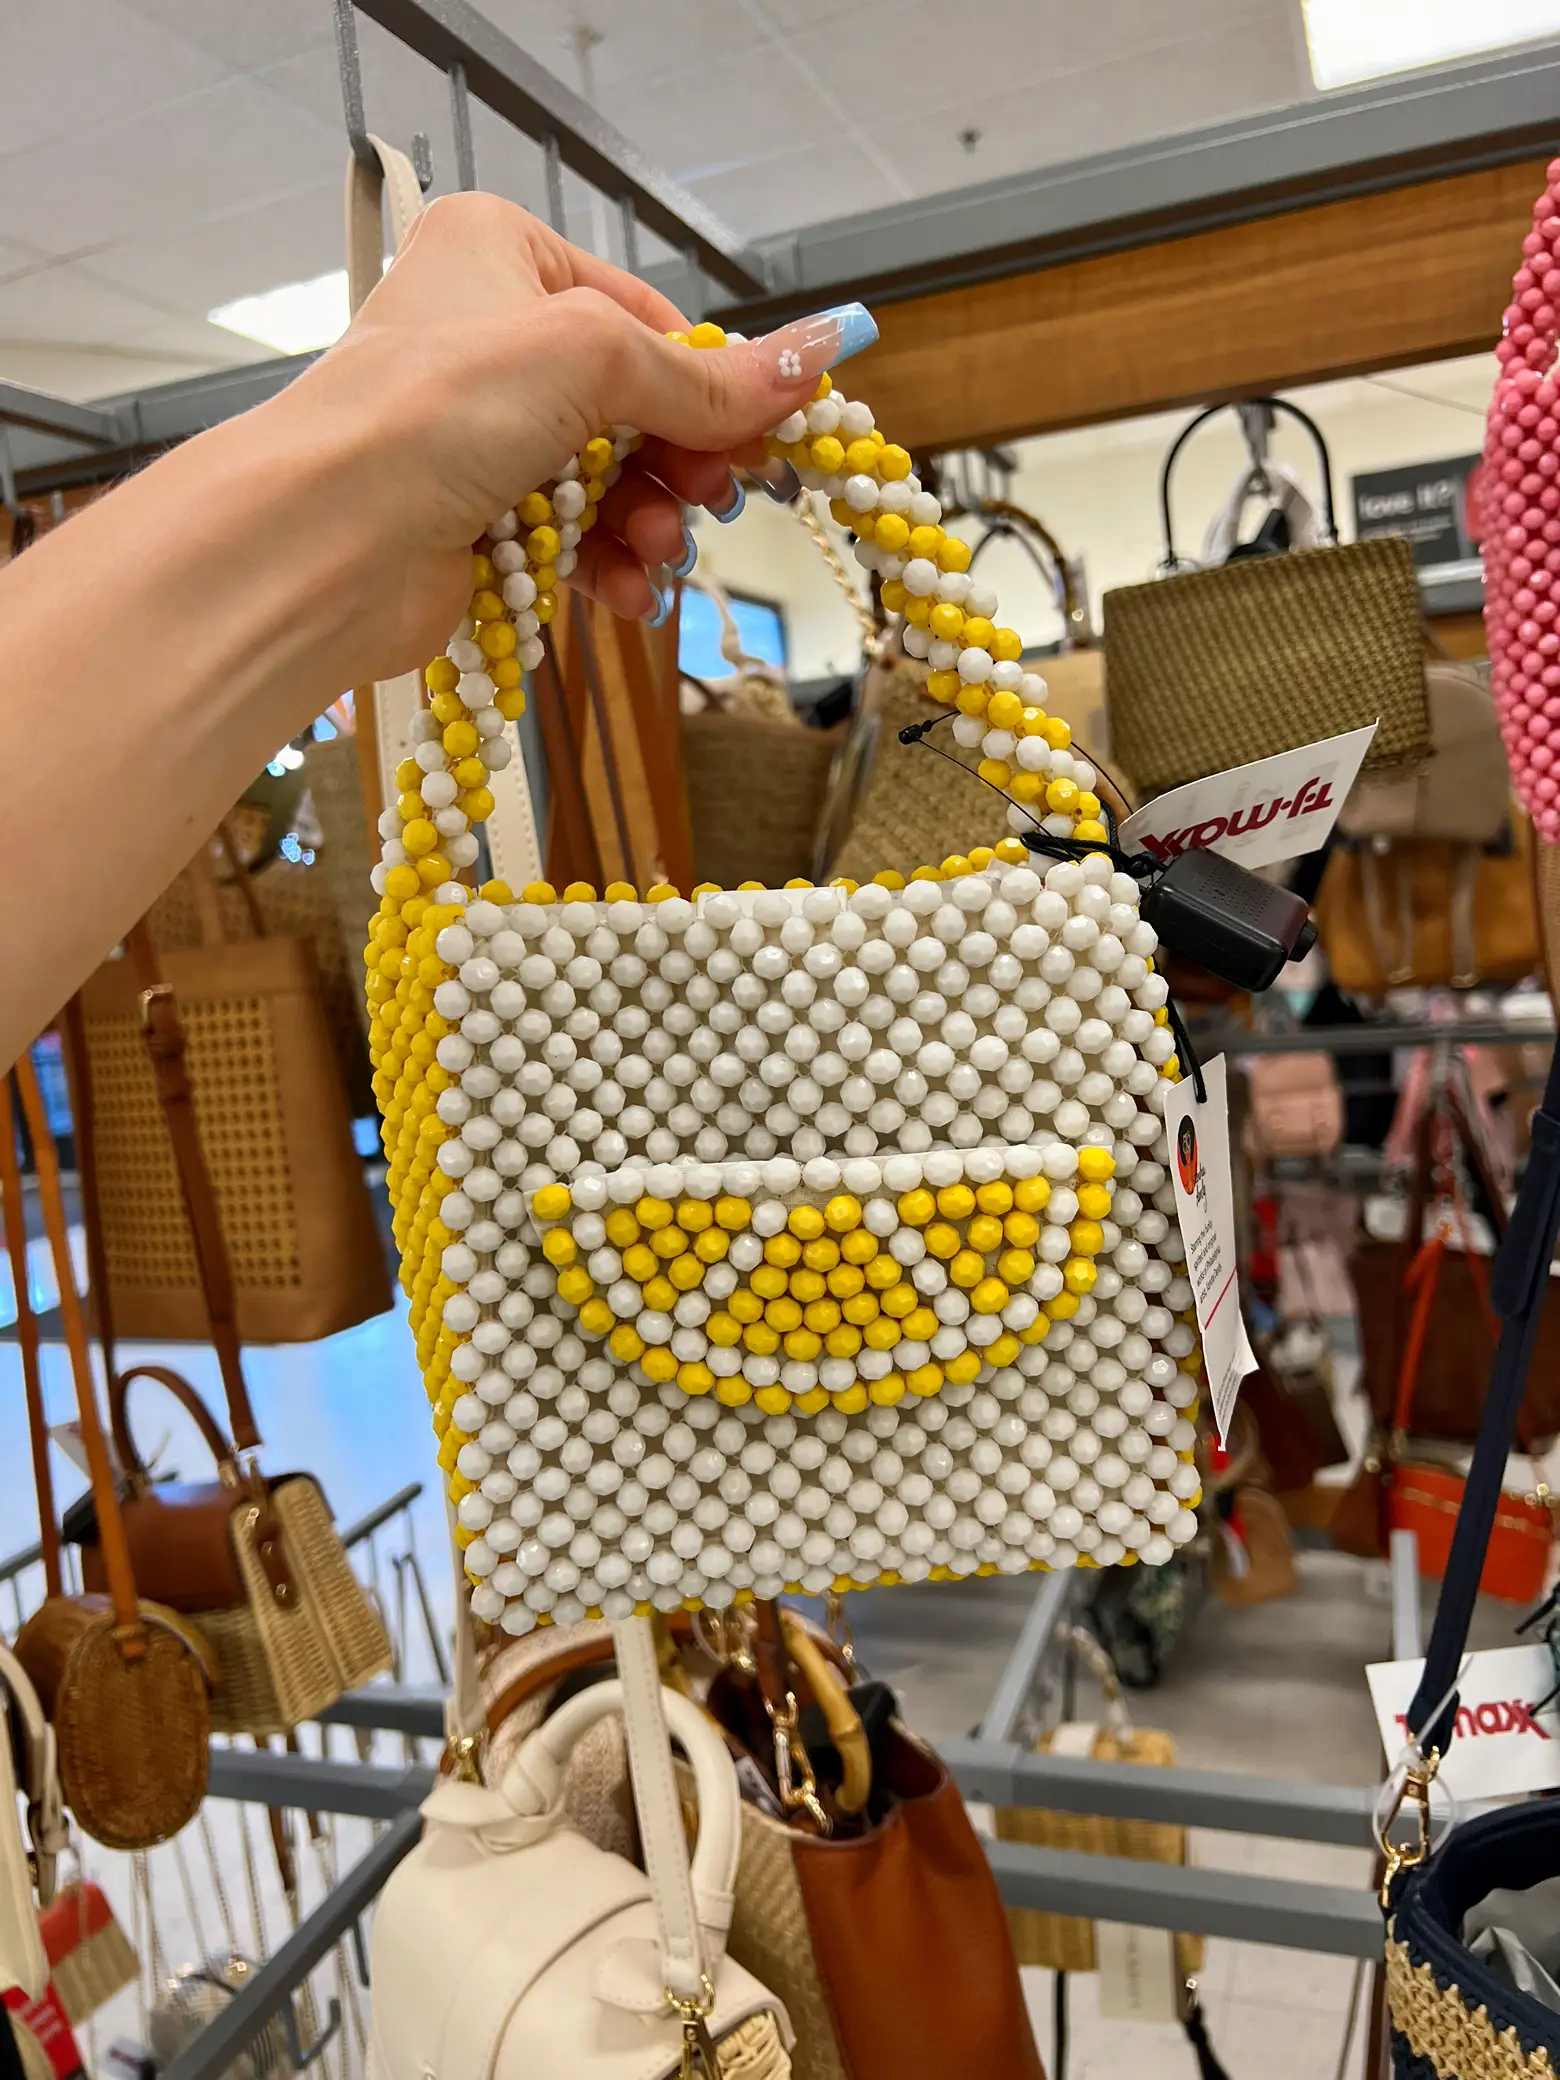 GUCCI BAGS SITTING at TJ MAXX!!! Discounted Designer Items!!! 